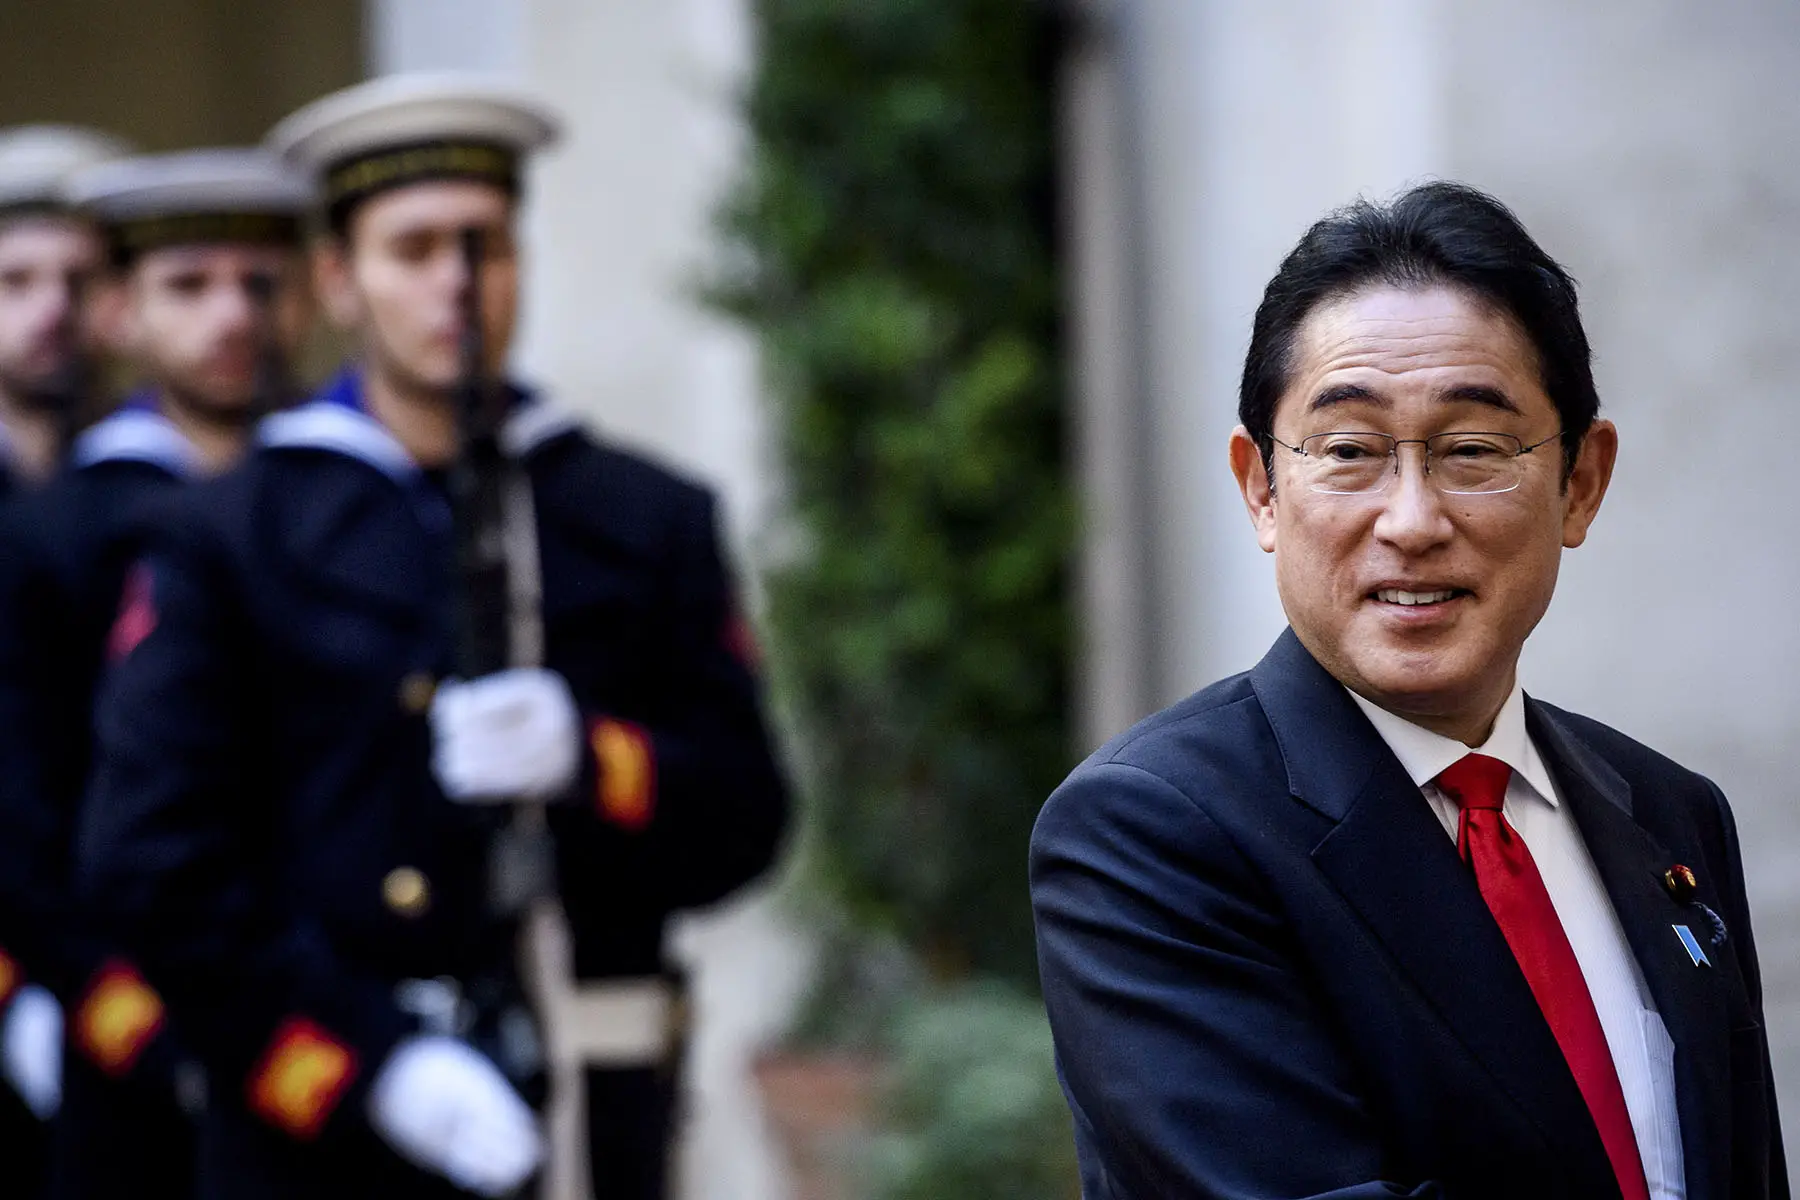 Smiling Prime Minister Minister Kishida Fumio during his 2023 visit to Rome, Italy. Roman Navy personnel in the background.